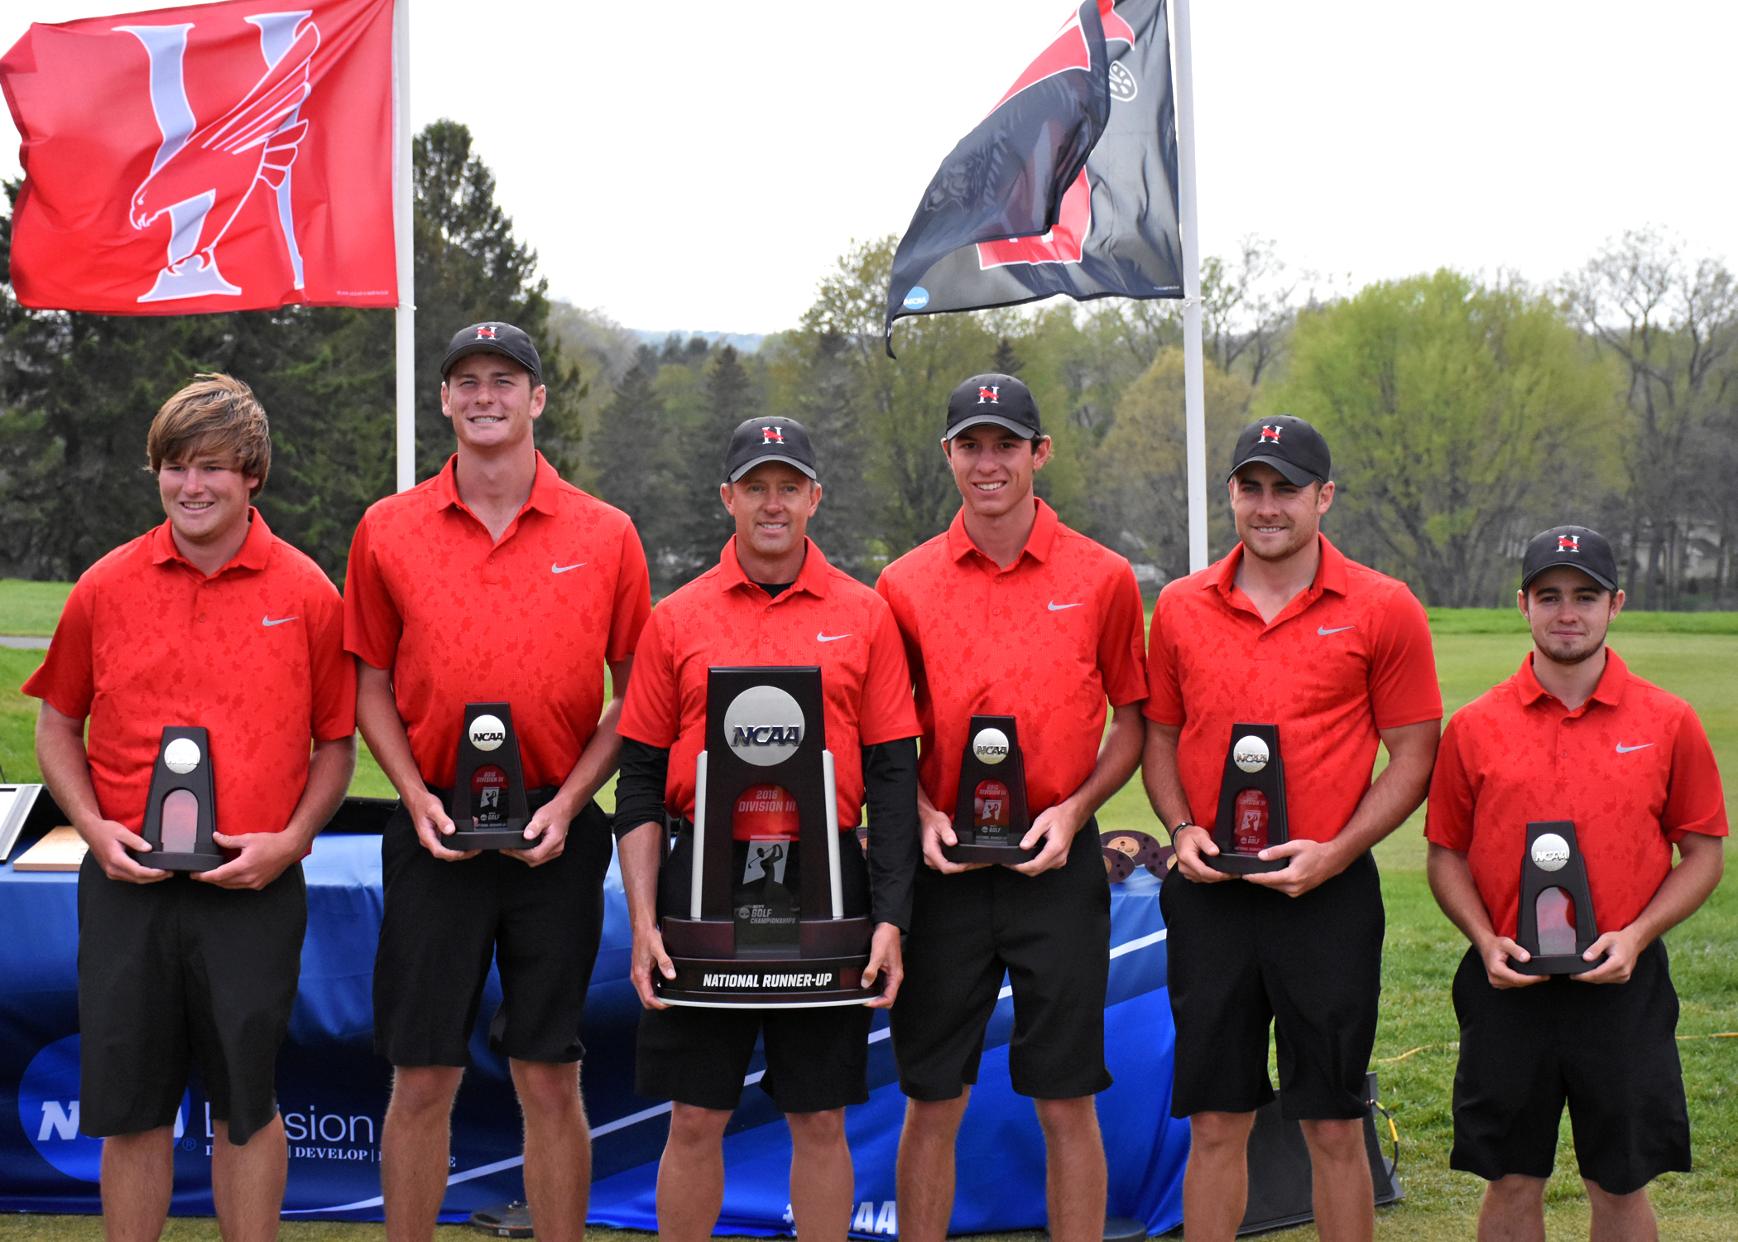 Huntingdon placed second in the NCAA Division III Men's Golf Championships for the Hawks' best finish during the NCAA era. Junior Addison Lambeth (second from right) tied for second individually and earned first-team All-American honors.